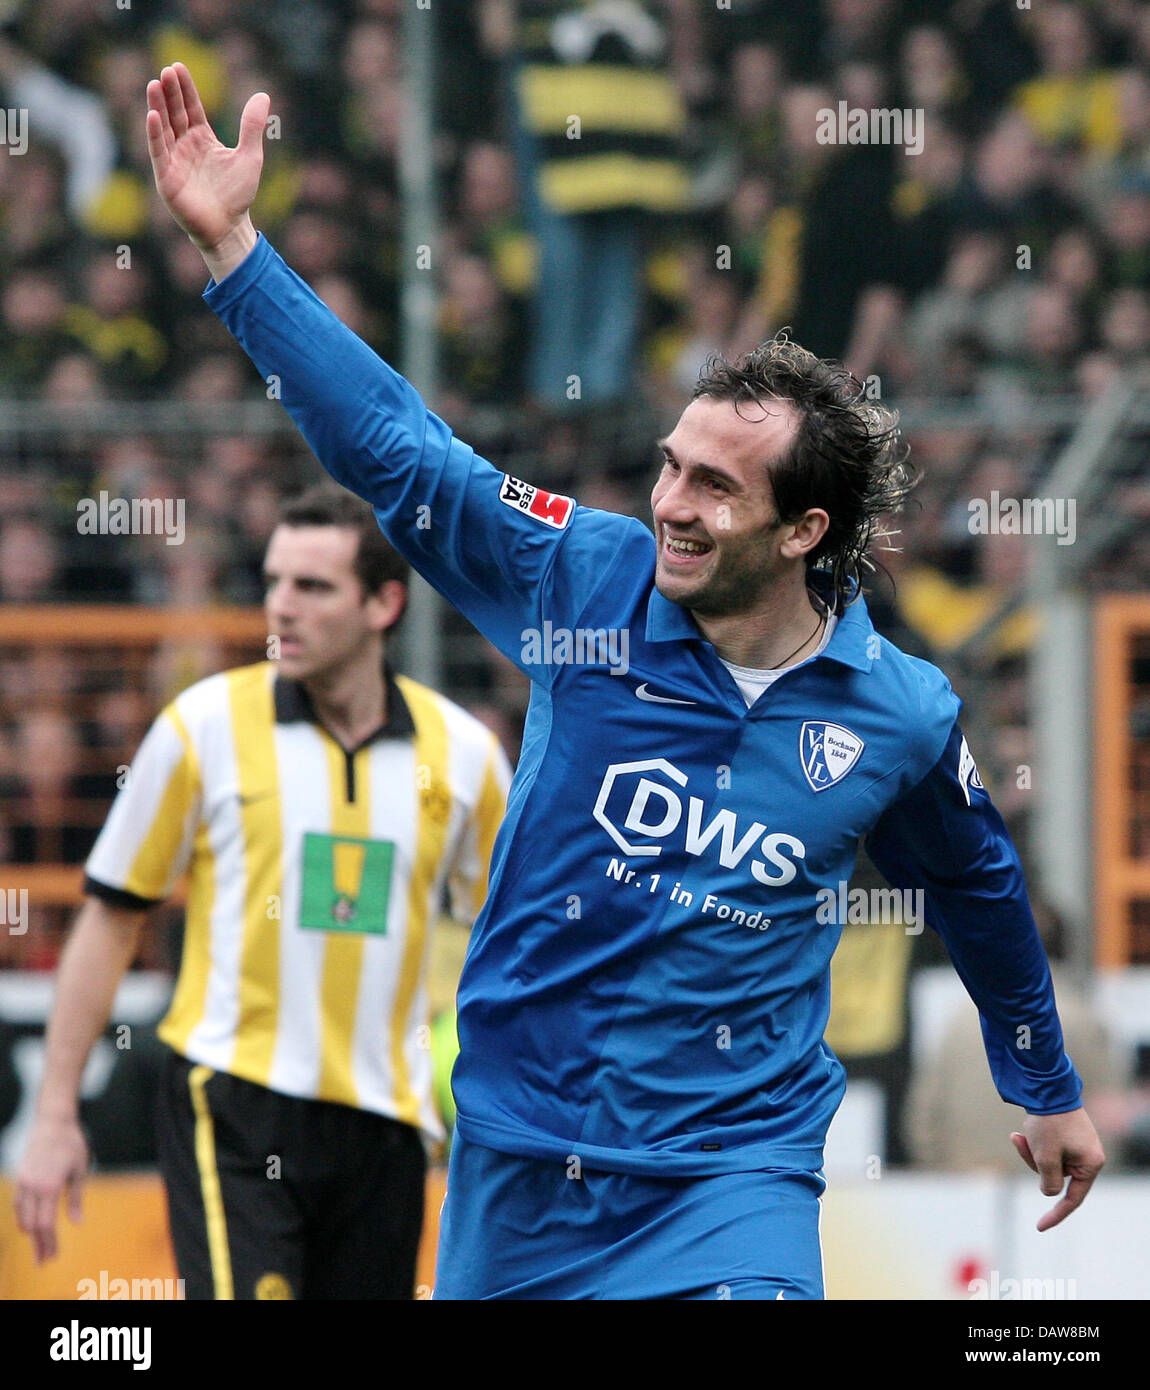 Theofanis Gekas (R) of Bochum cheers scoring the 1-0 during the Bundesliga match VfL Bochum v BVB Borussia Dortmund at the Ruhr stadium of Bochum, Germany, Saturday, 10 March 2007. Bochum defeats Dortmund 2-0. Photo: Achim Scheidemann (ATTENTION: BLOCKING PERIOD! The DFL permits the further utilisation of the pictures in IPTV, mobile services and other new technologies no earlier t Stock Photo